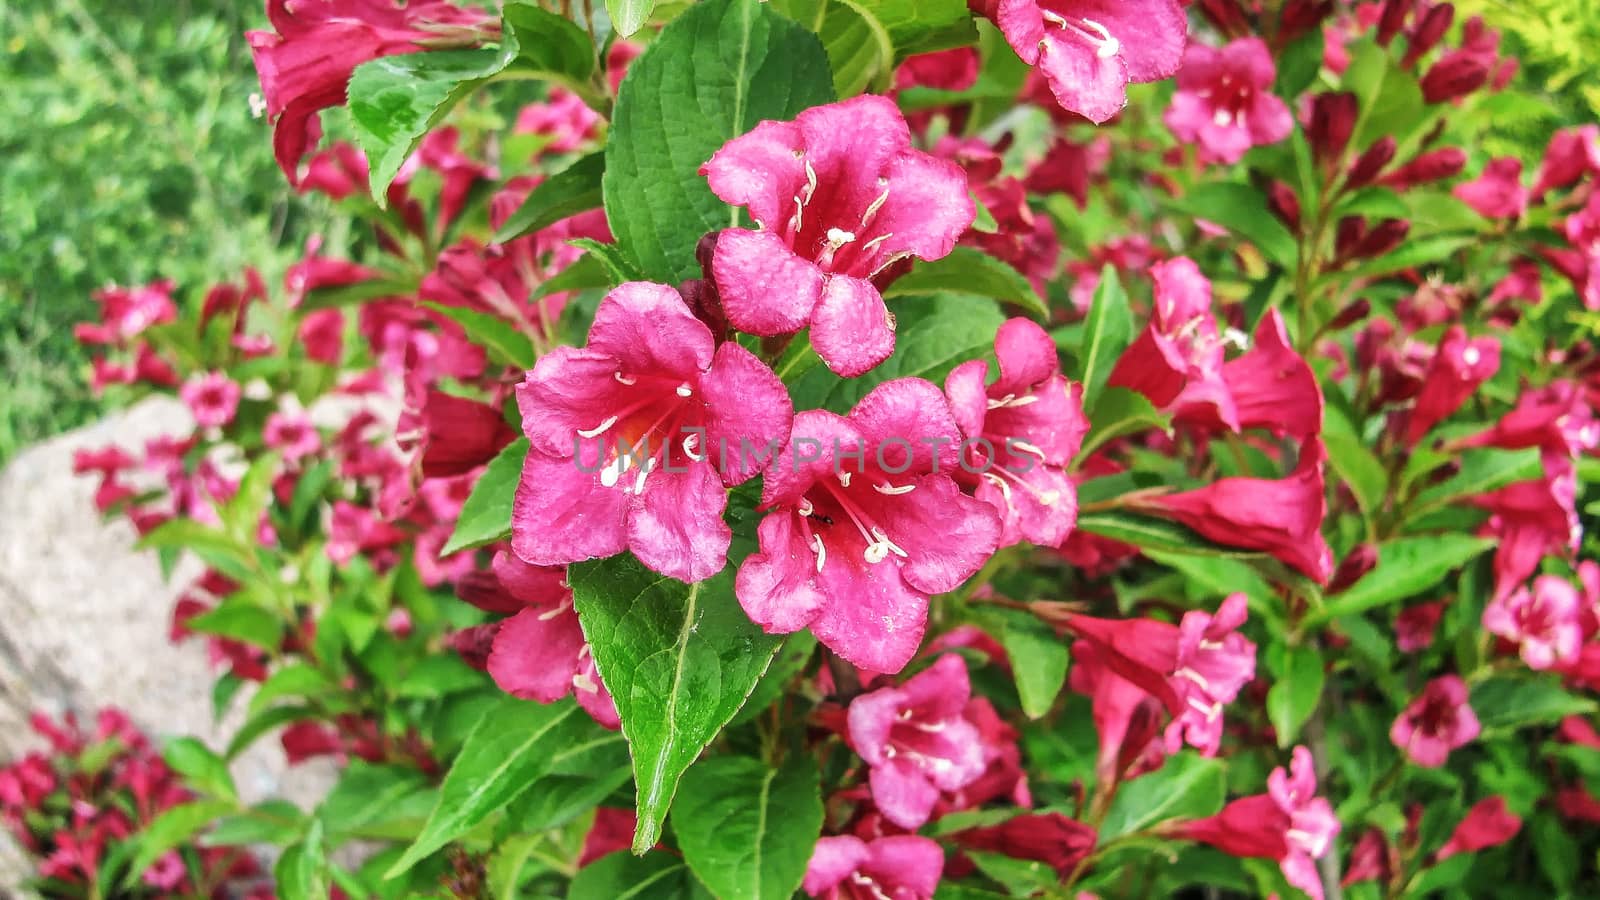 Live flowers of pink color           